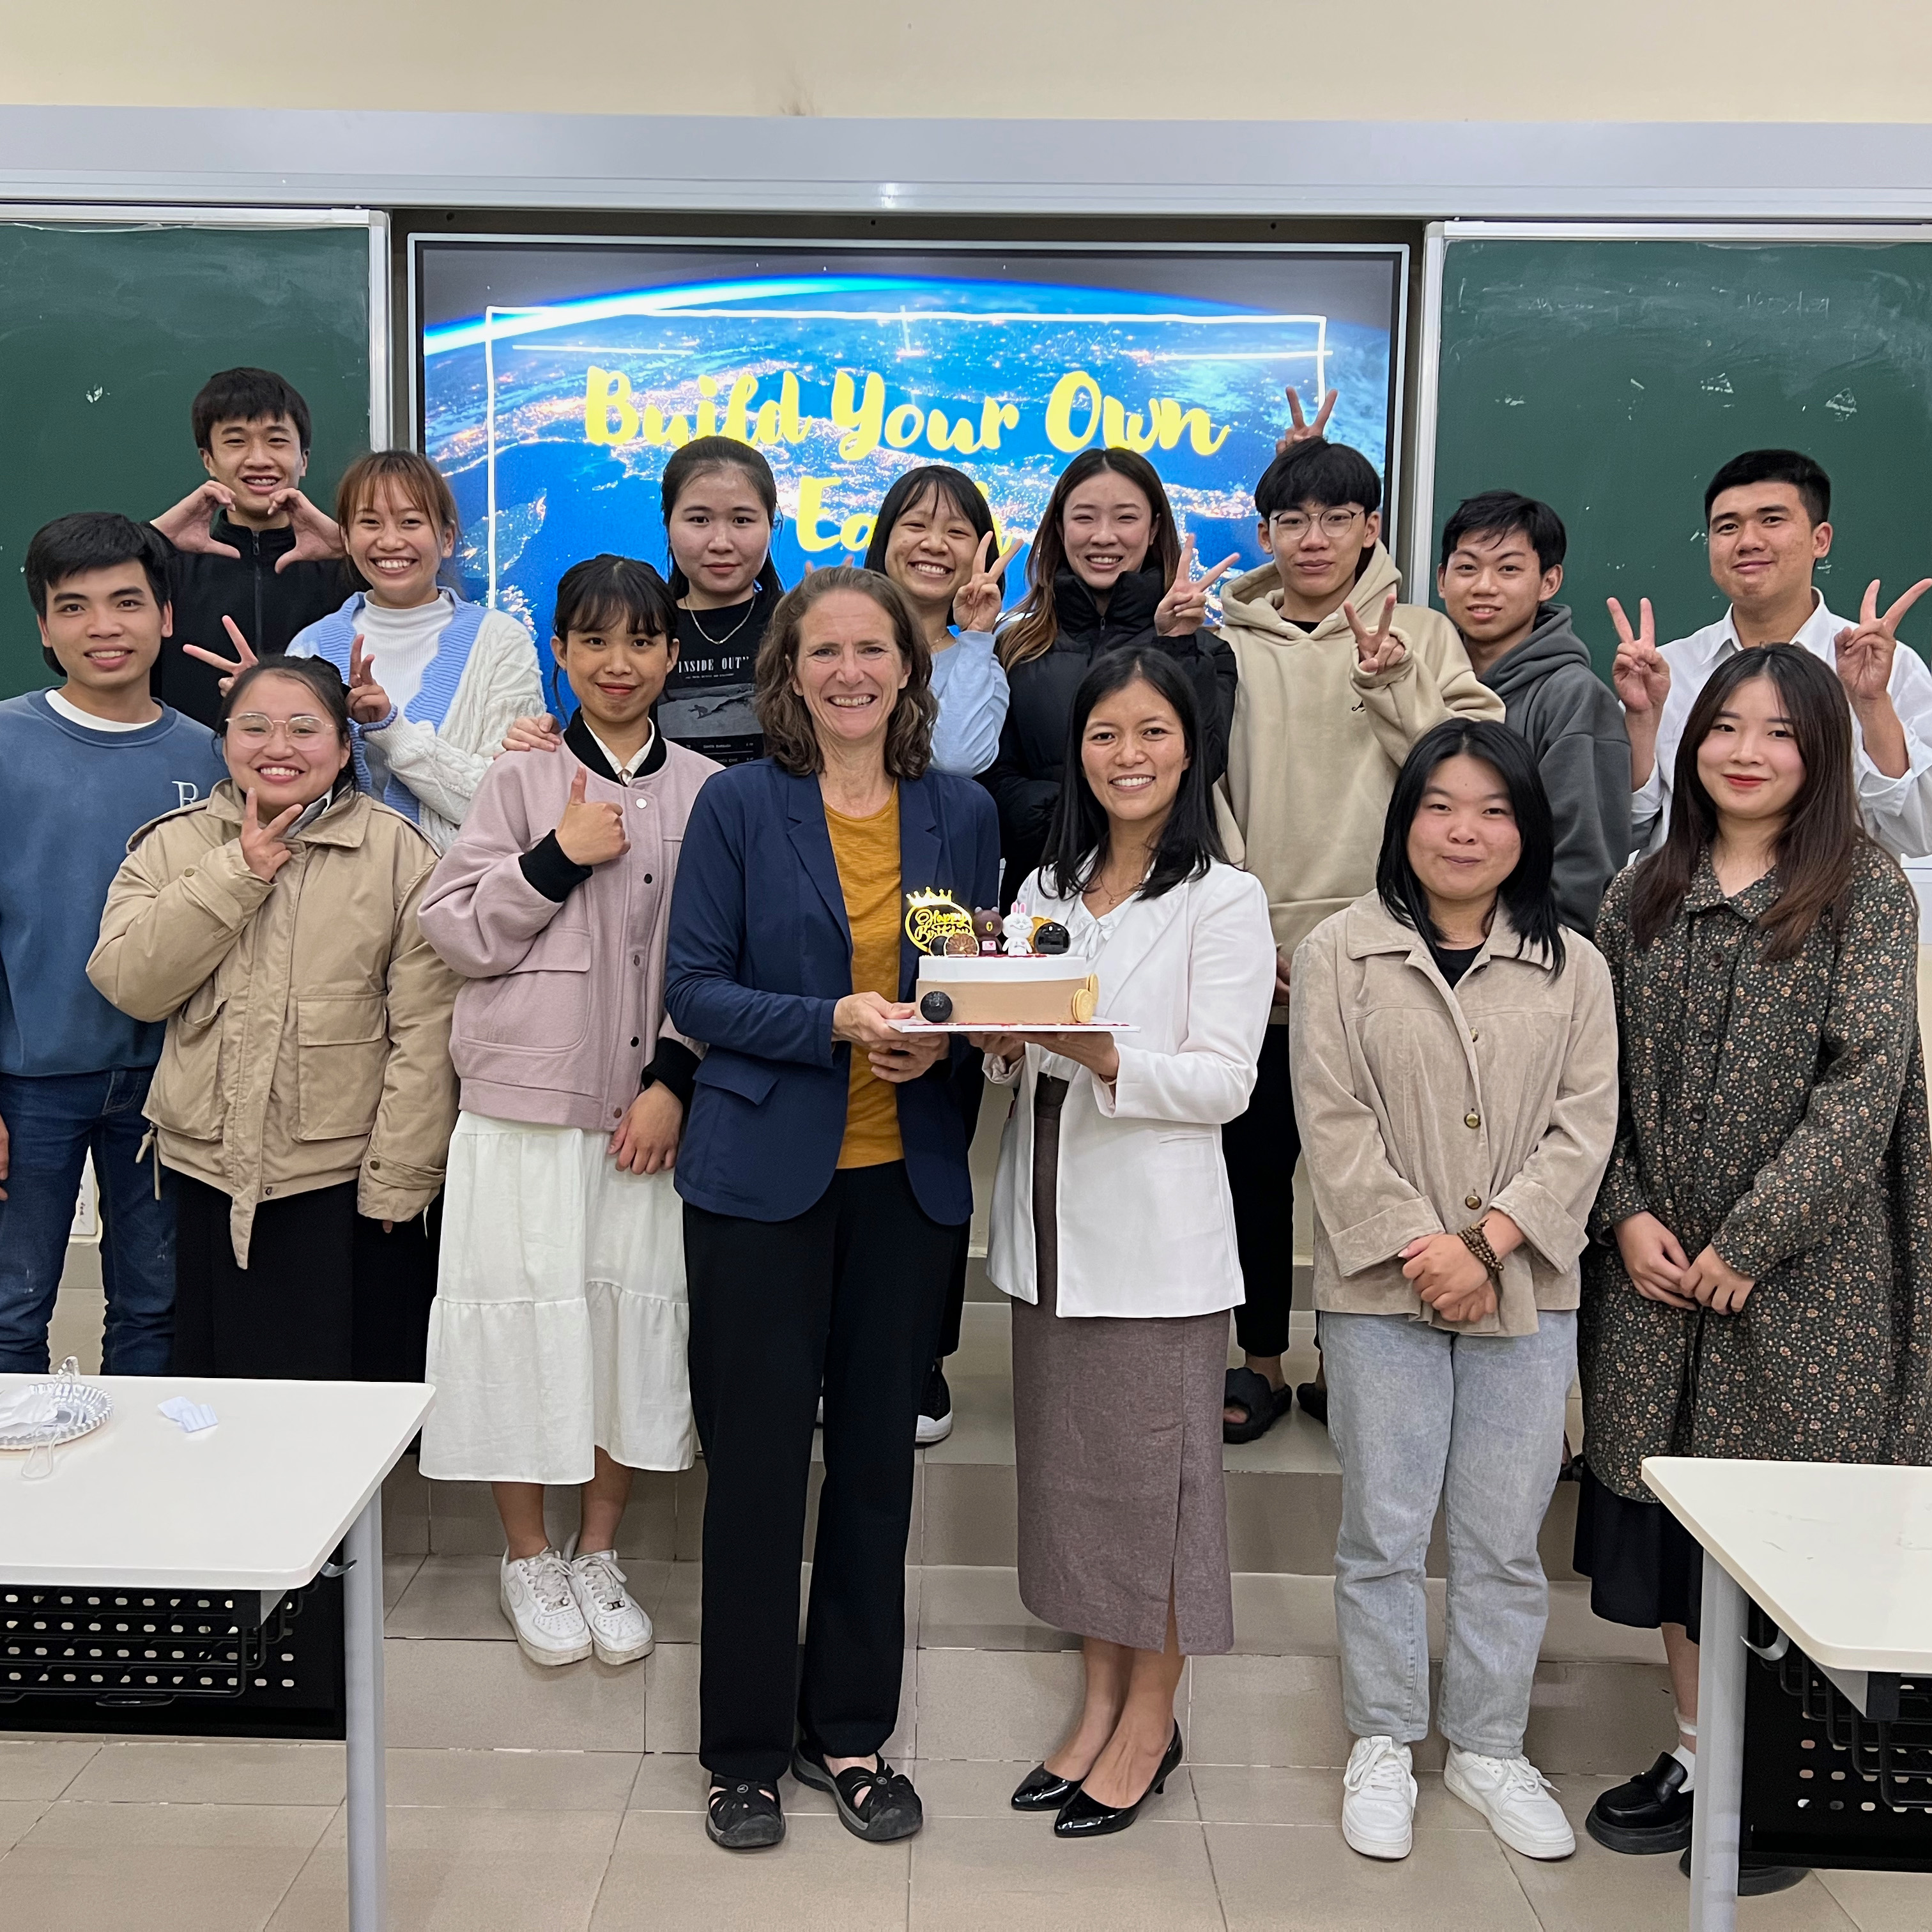 Cindy Shellito posing with her University of Dalat students on the last day of the course.